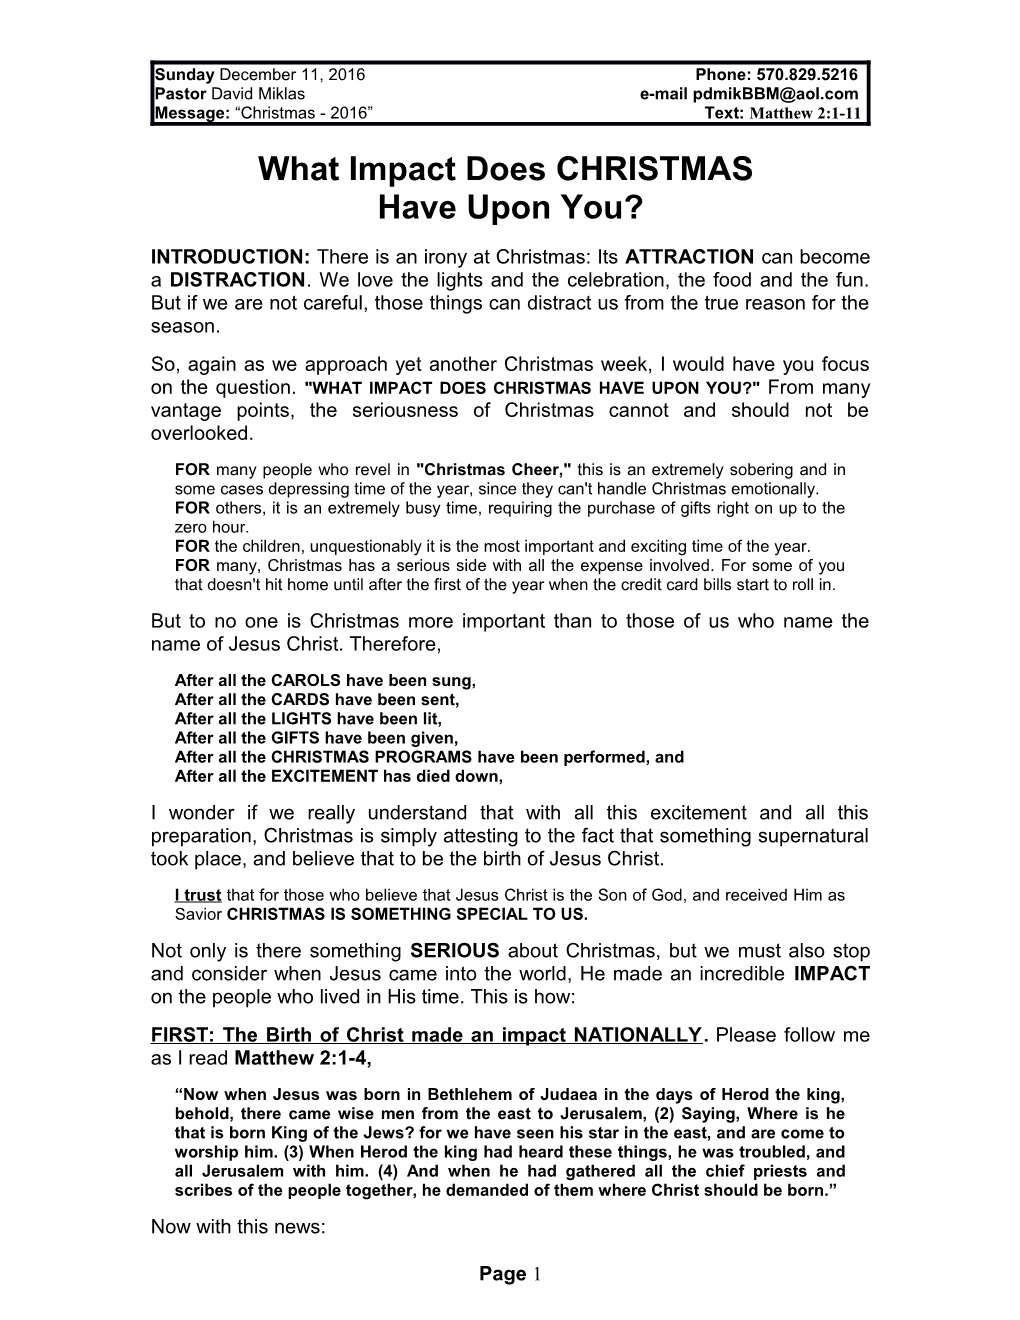 What Impact Does CHRISTMAS Have Upon You?